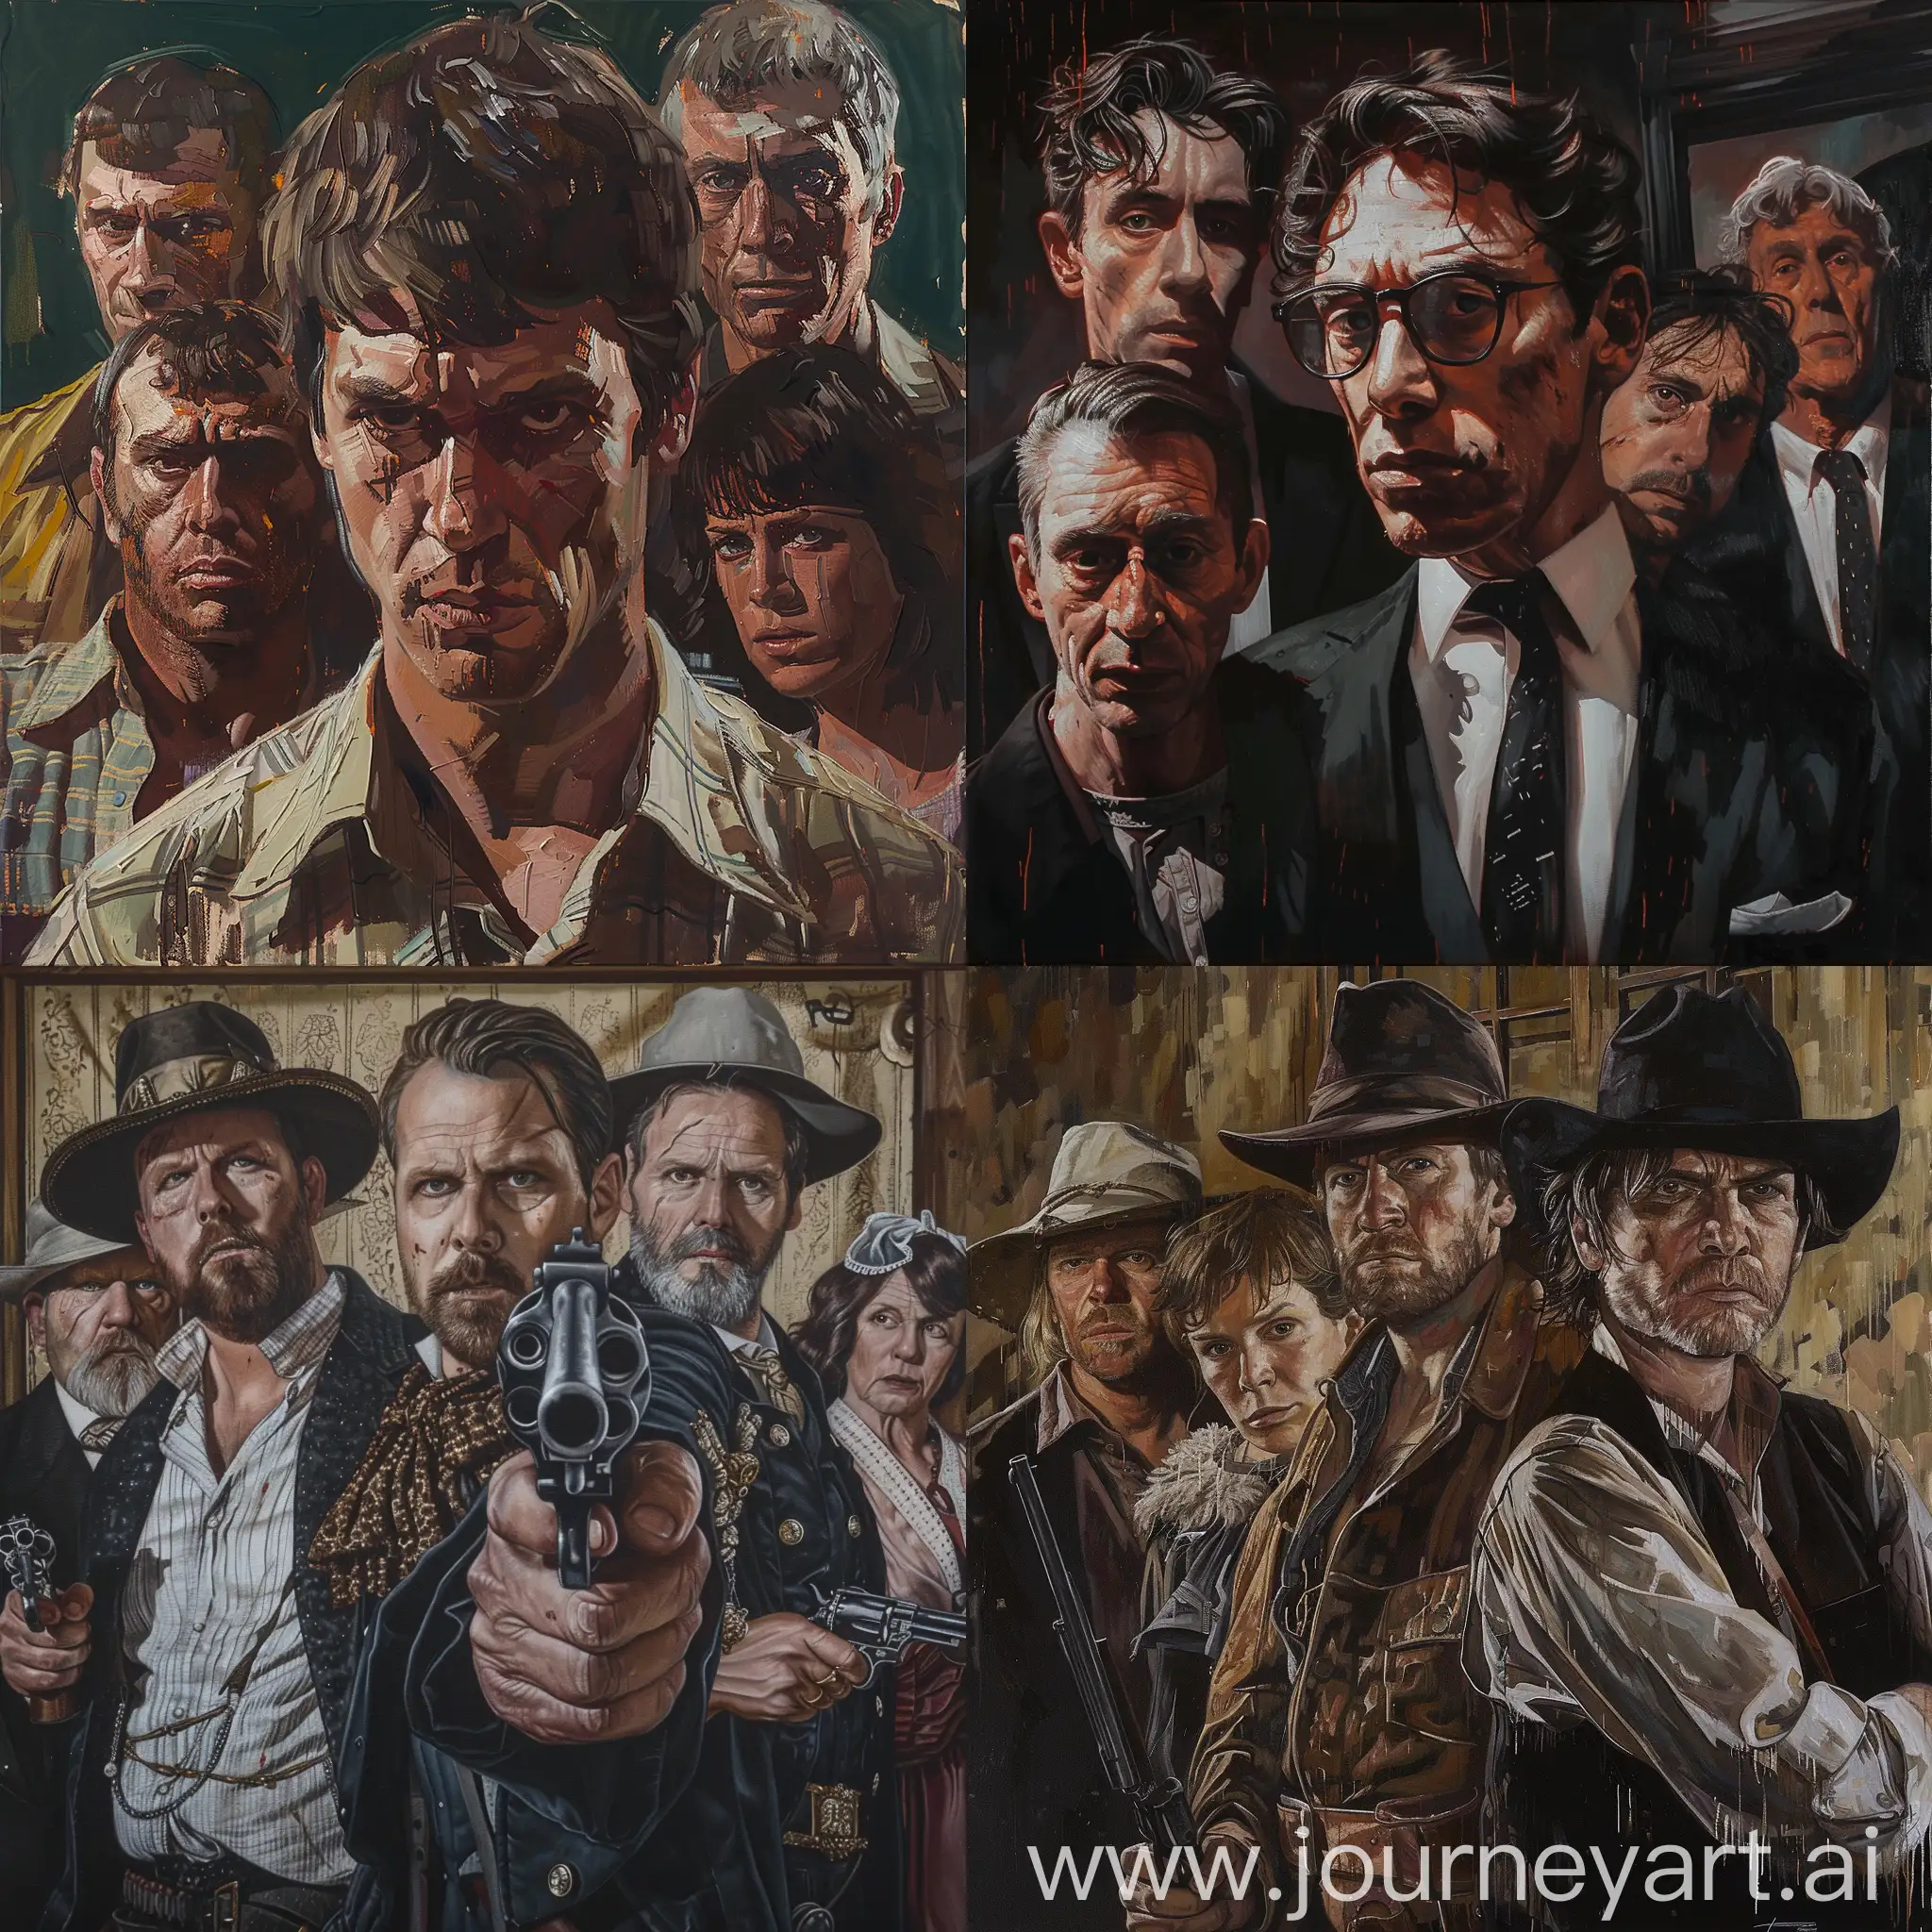 Superdetailed Ryan J Ebelt style oilpainting of the killtony cast with William Montgomery in the focus